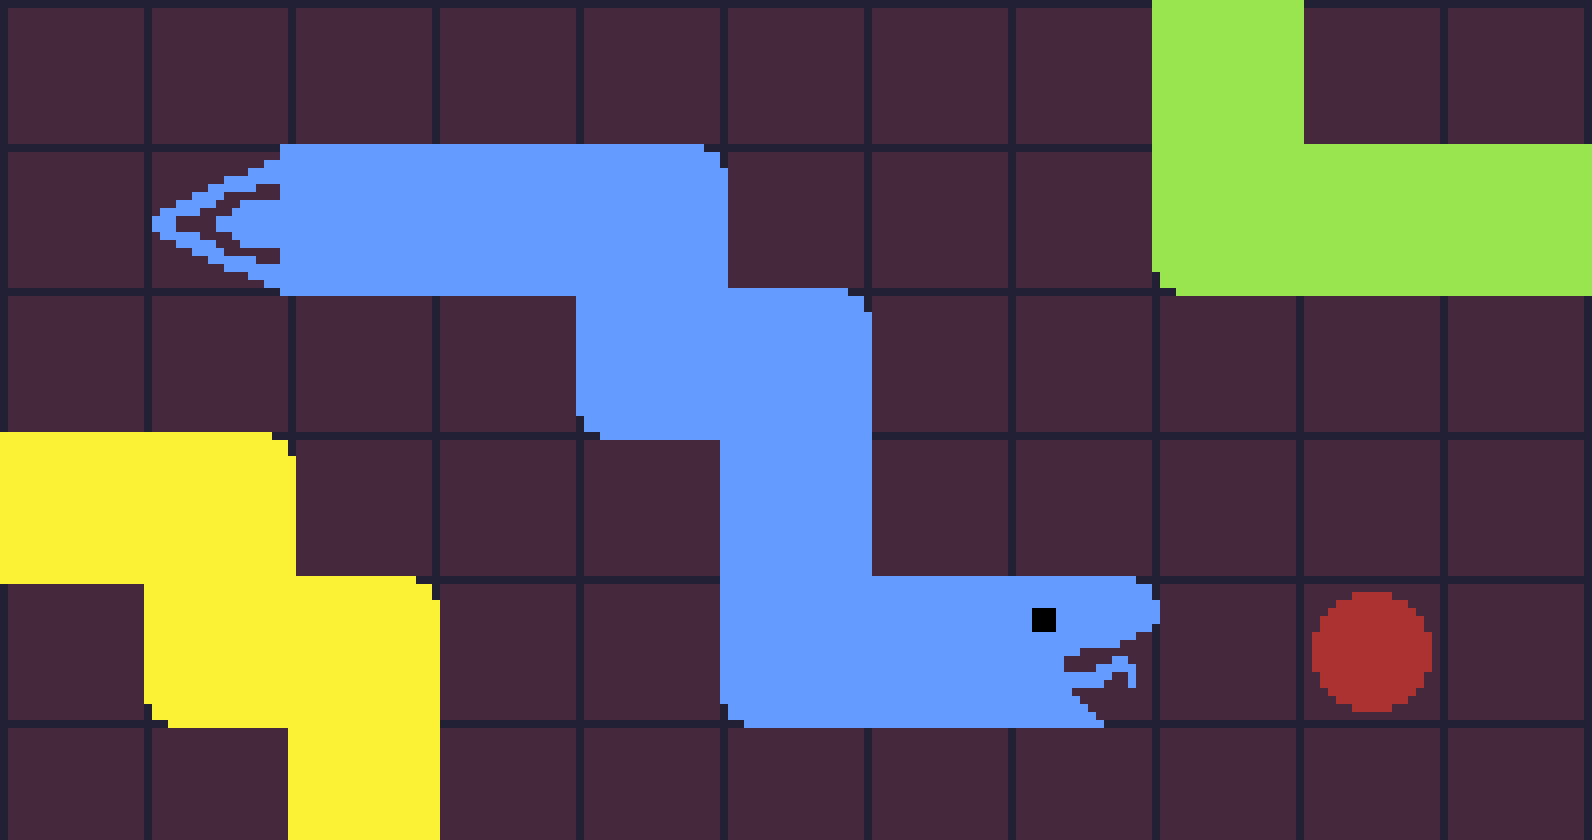 A picture of a blue pixel art snake that is navigating towards a food object on a battlesnake grid